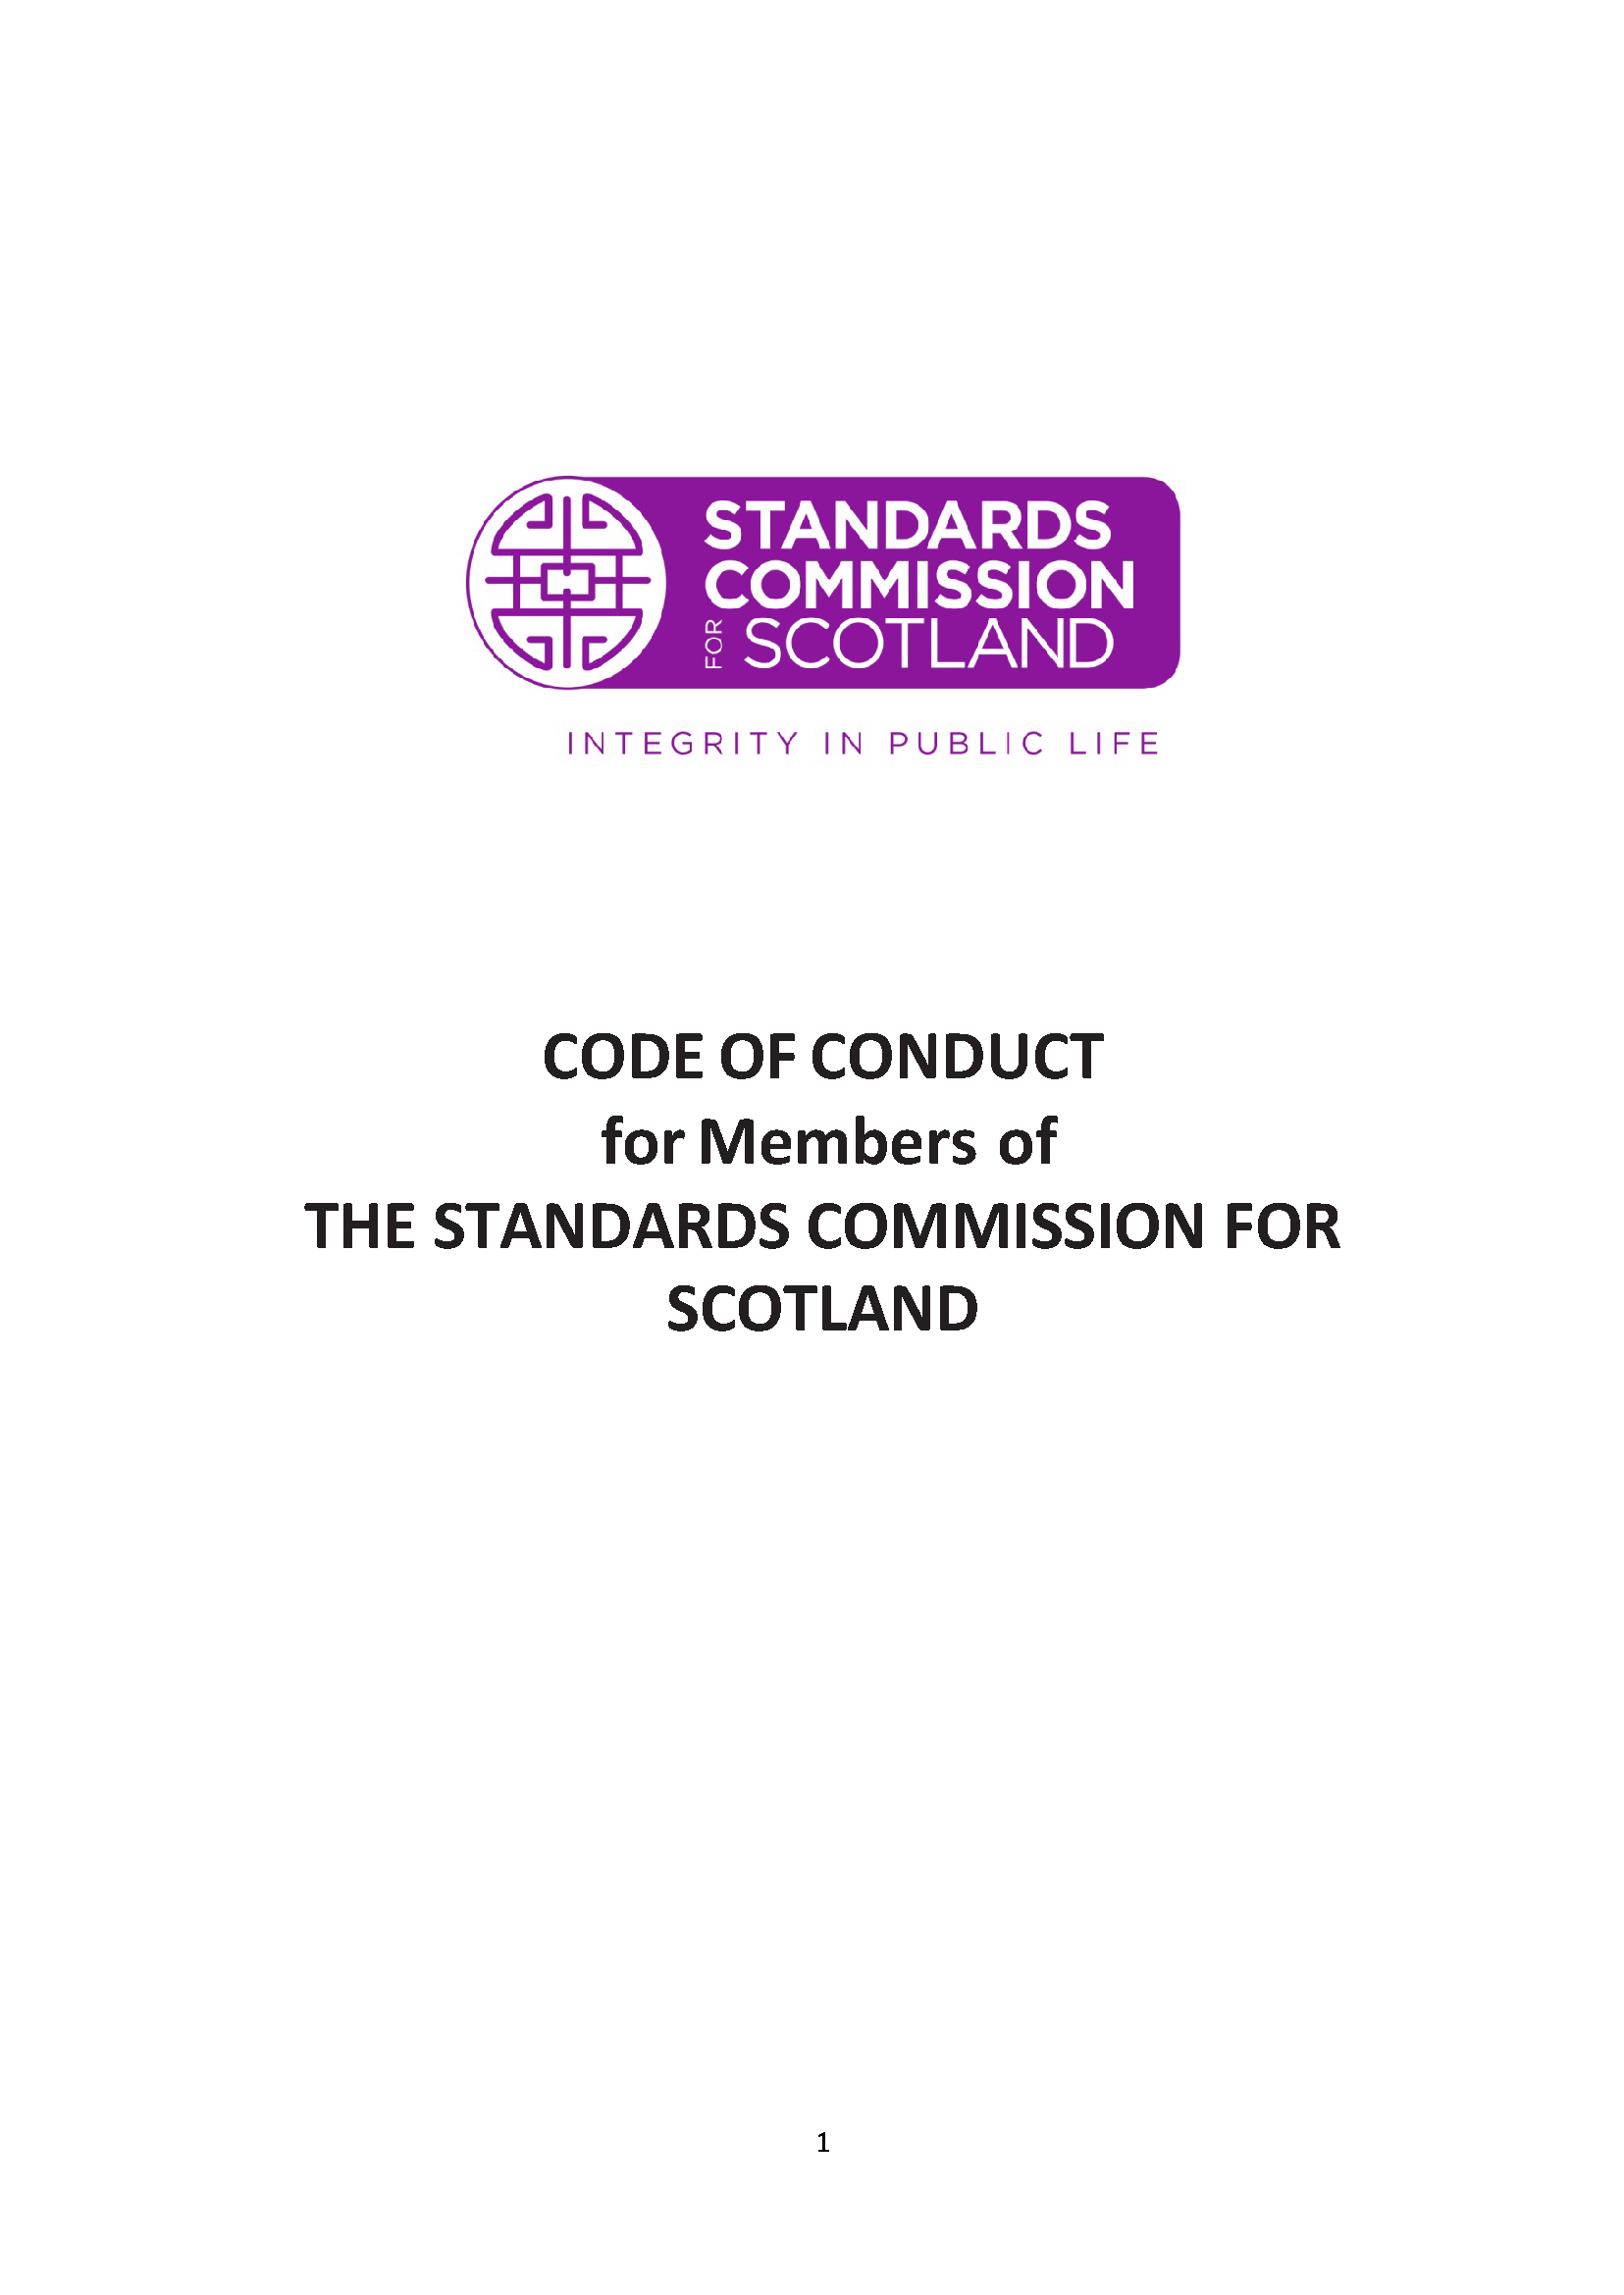 Code of Conduct for Standards Commission Members